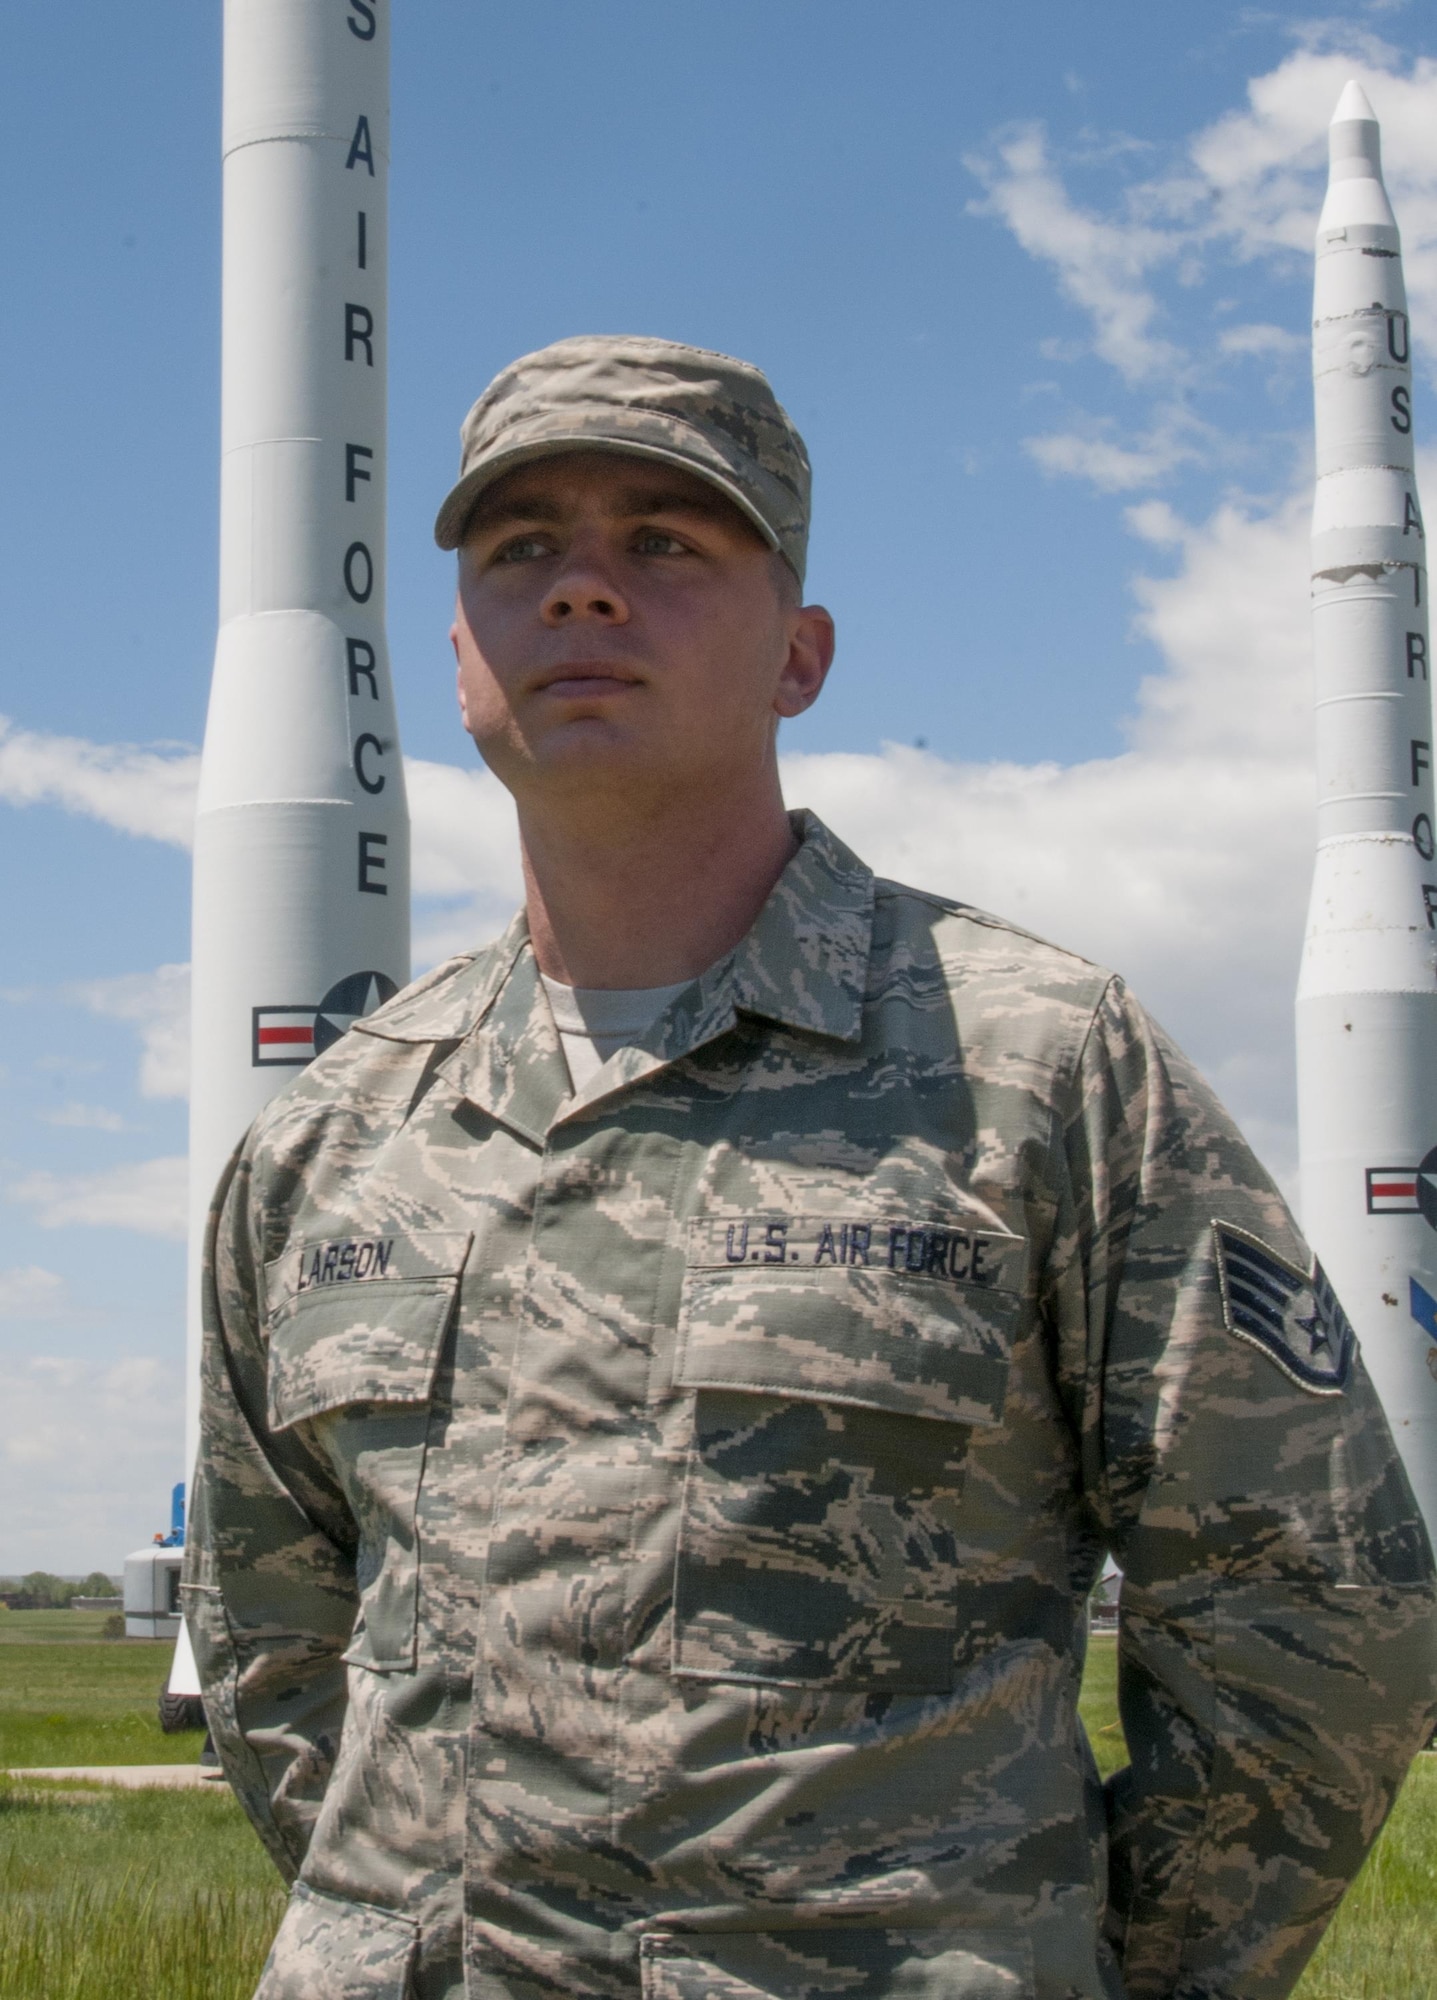 Staff Sgt. Alex Larson, 90th Medical Operations Squadron flight and operations medicine technician, poses in front of the missile display on F.E. Warren Air Force Base, Wyo., June 1, 2016. Larson is slated to attend Officer Training School in early 2017, then attend technical school to become a missileer. (U.S. Air Force photo by Senior Airman Jason Wiese)